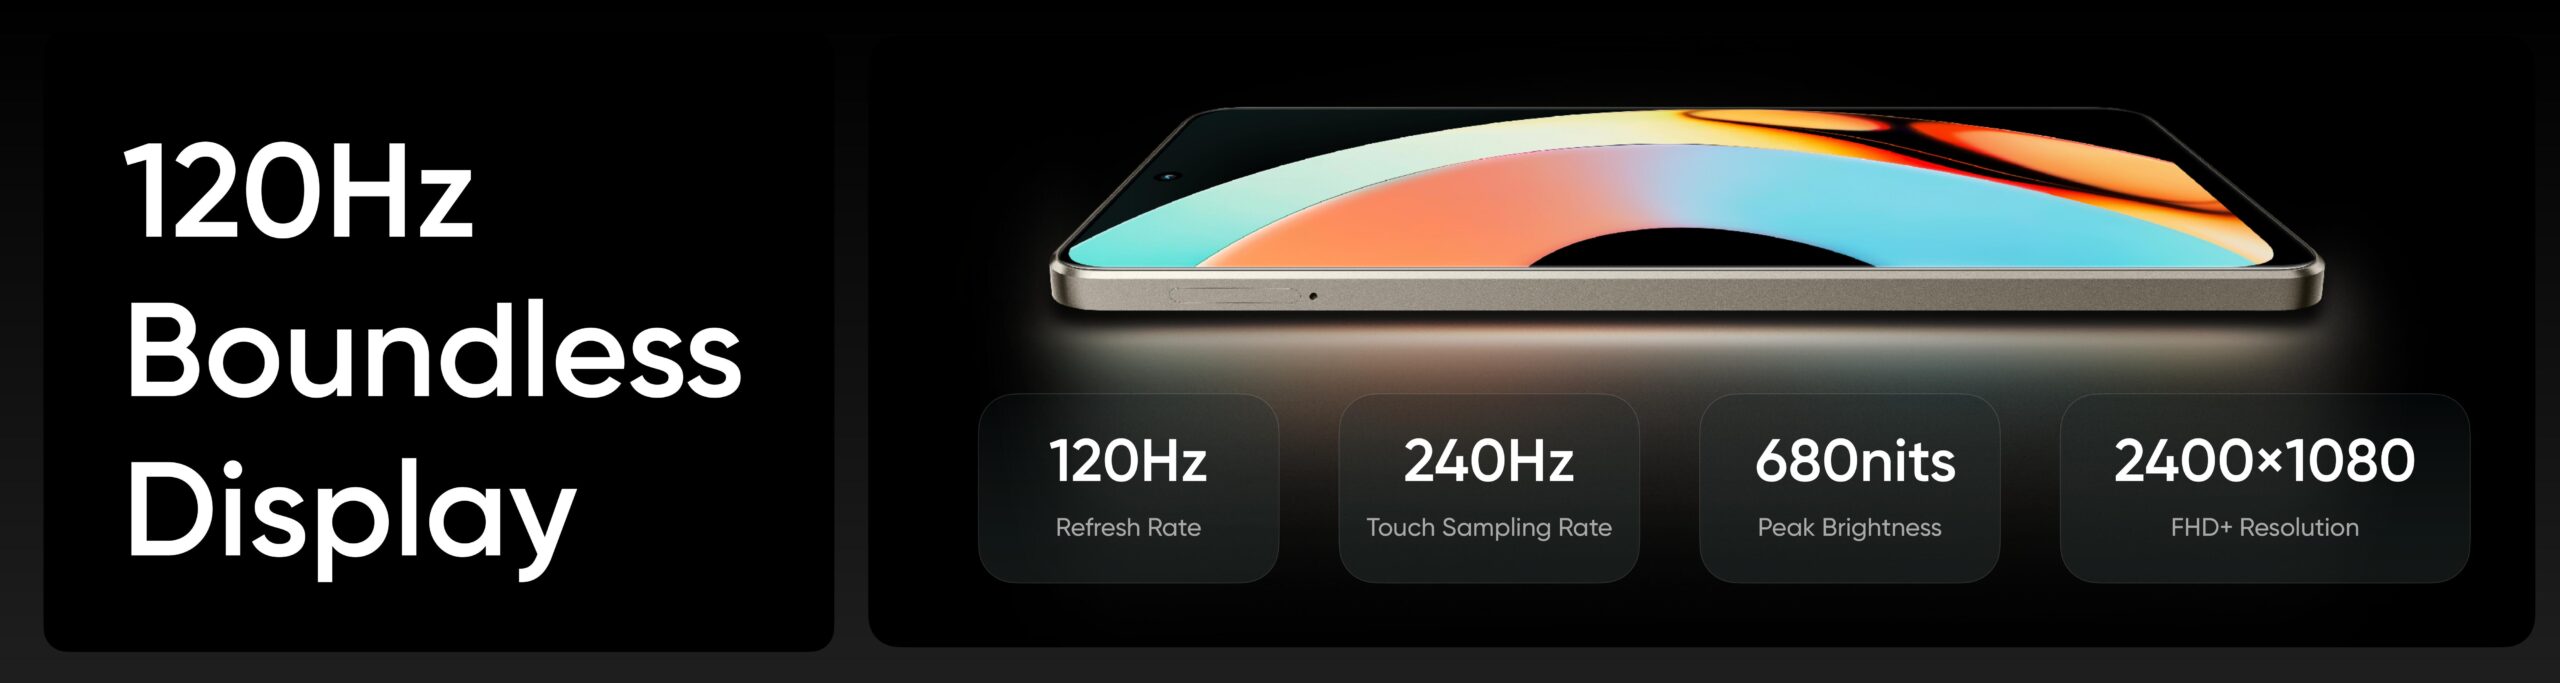 realme 10 Pro 120Hz Boundless Display scaled